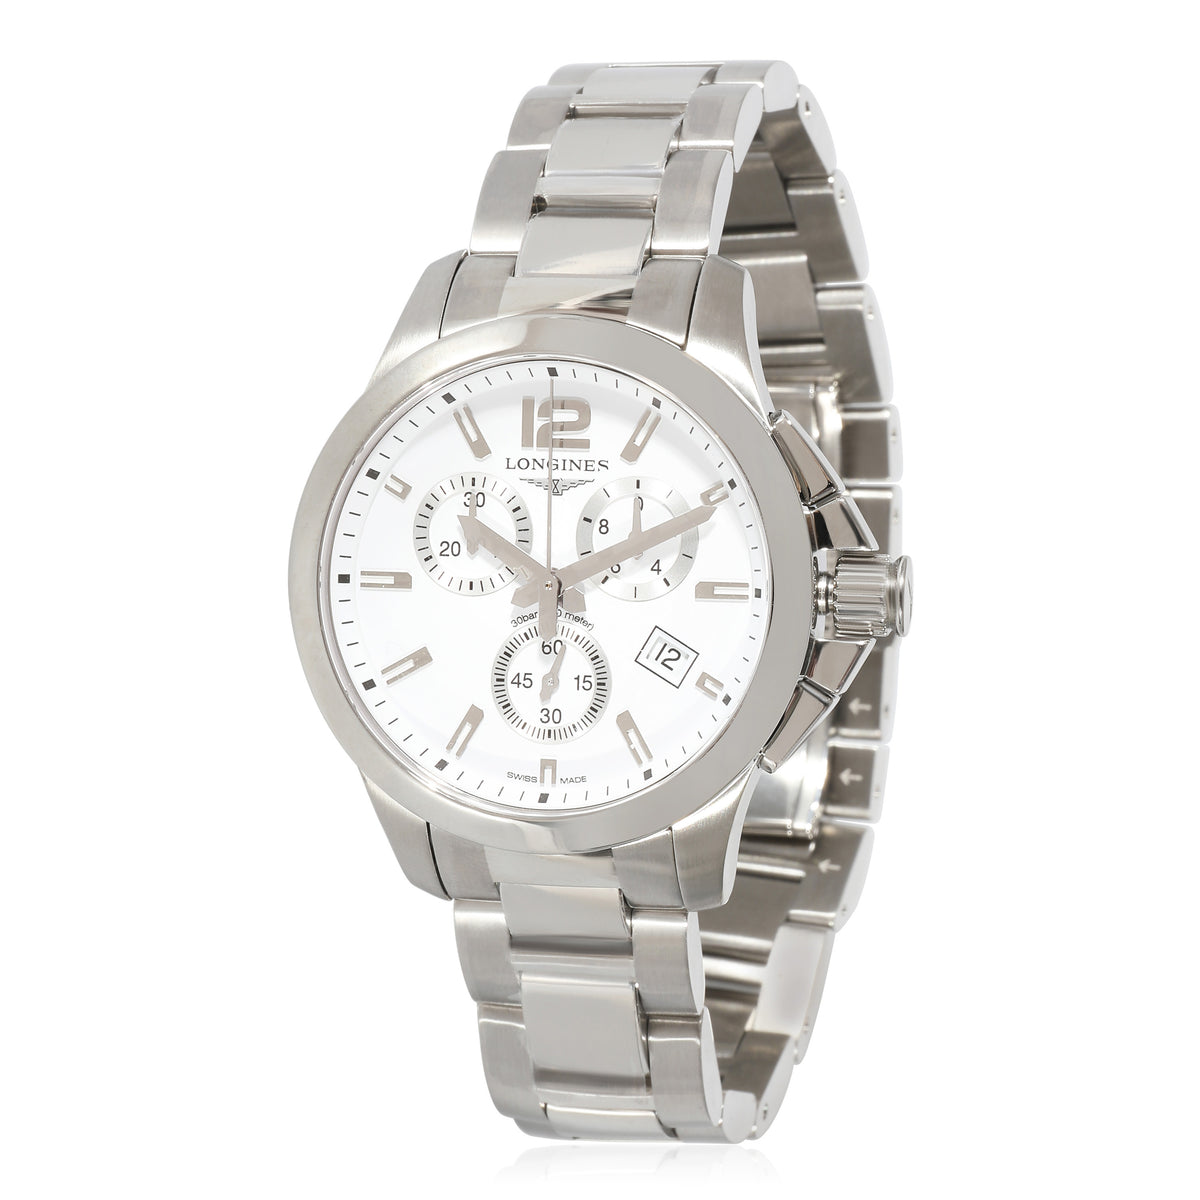 Conquest L3.379.4.16.6 Unisex Watch in  Stainless Steel